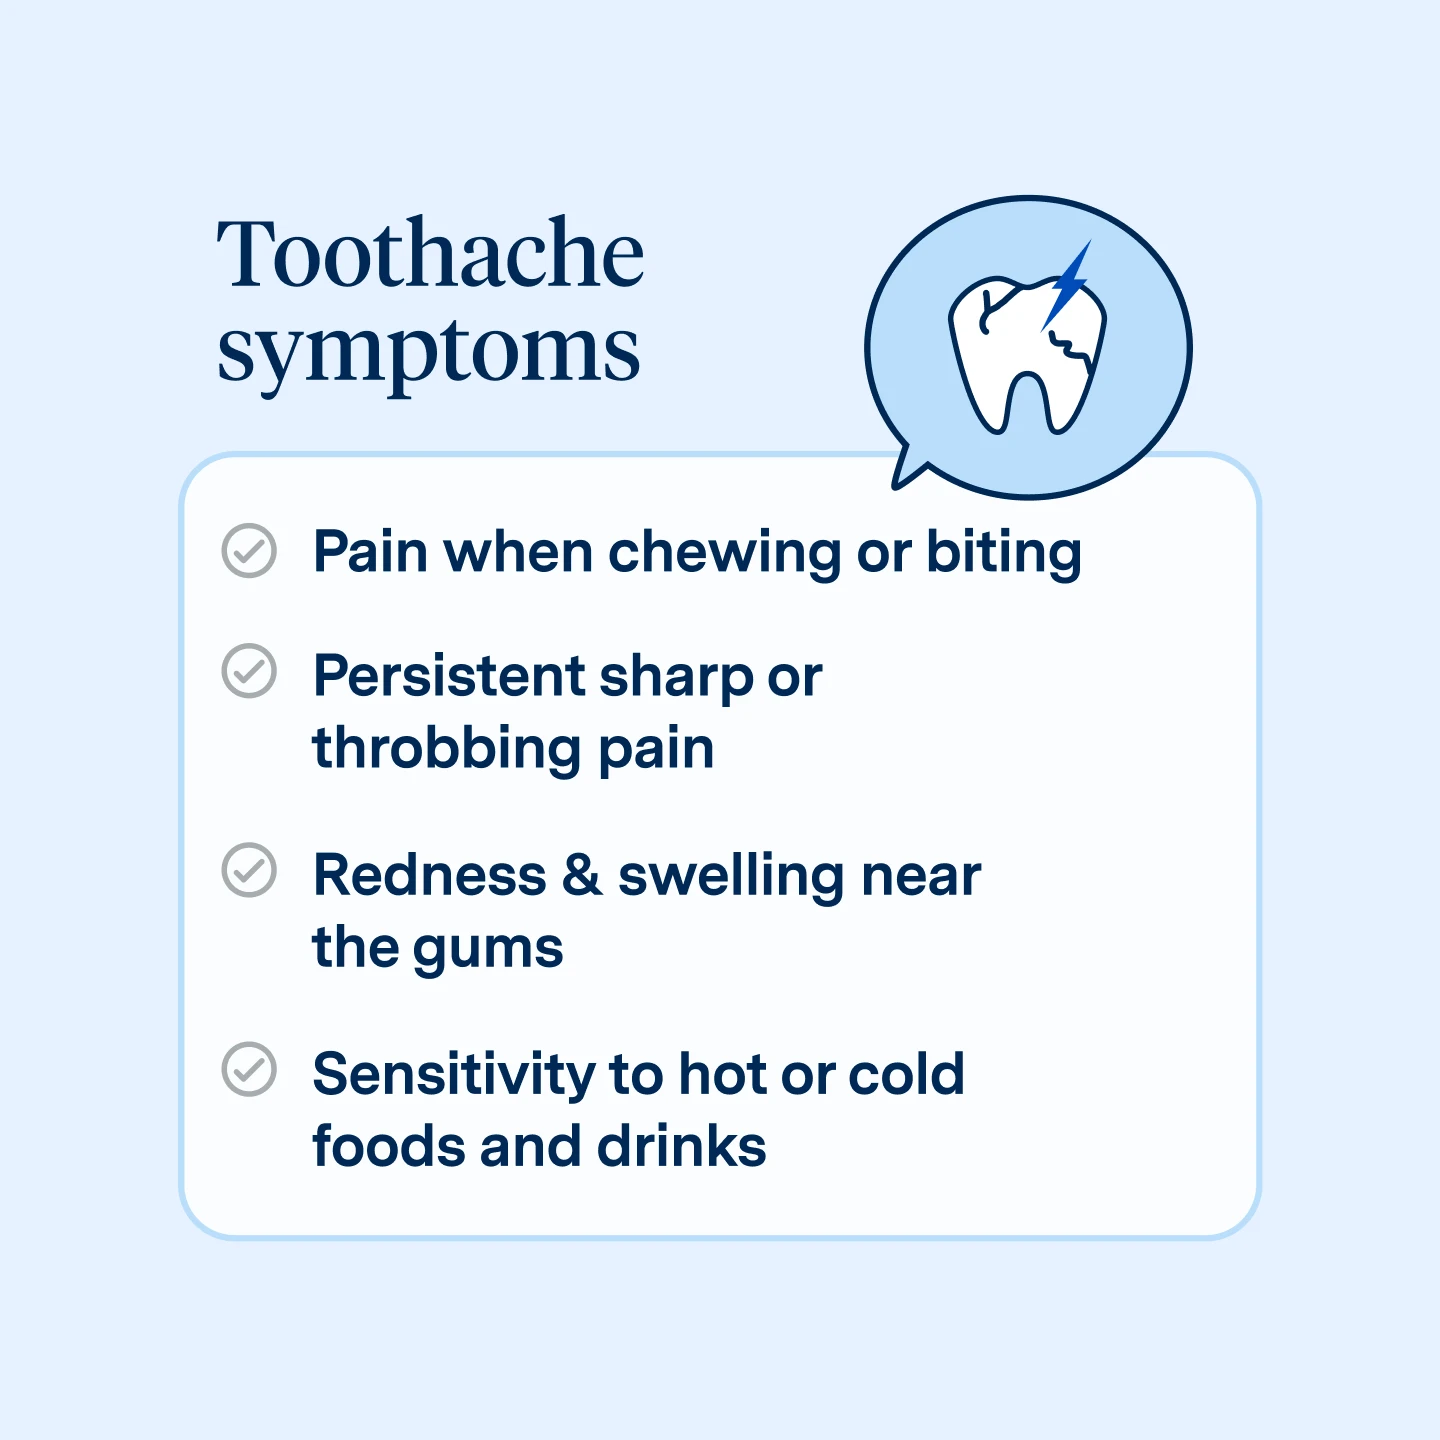 Toothache symptoms include, pain when chewing or biting, persistent sharp or throbbing pain, redness & swelling near the gums, sensitivity to hot or cold foods and drinks.
